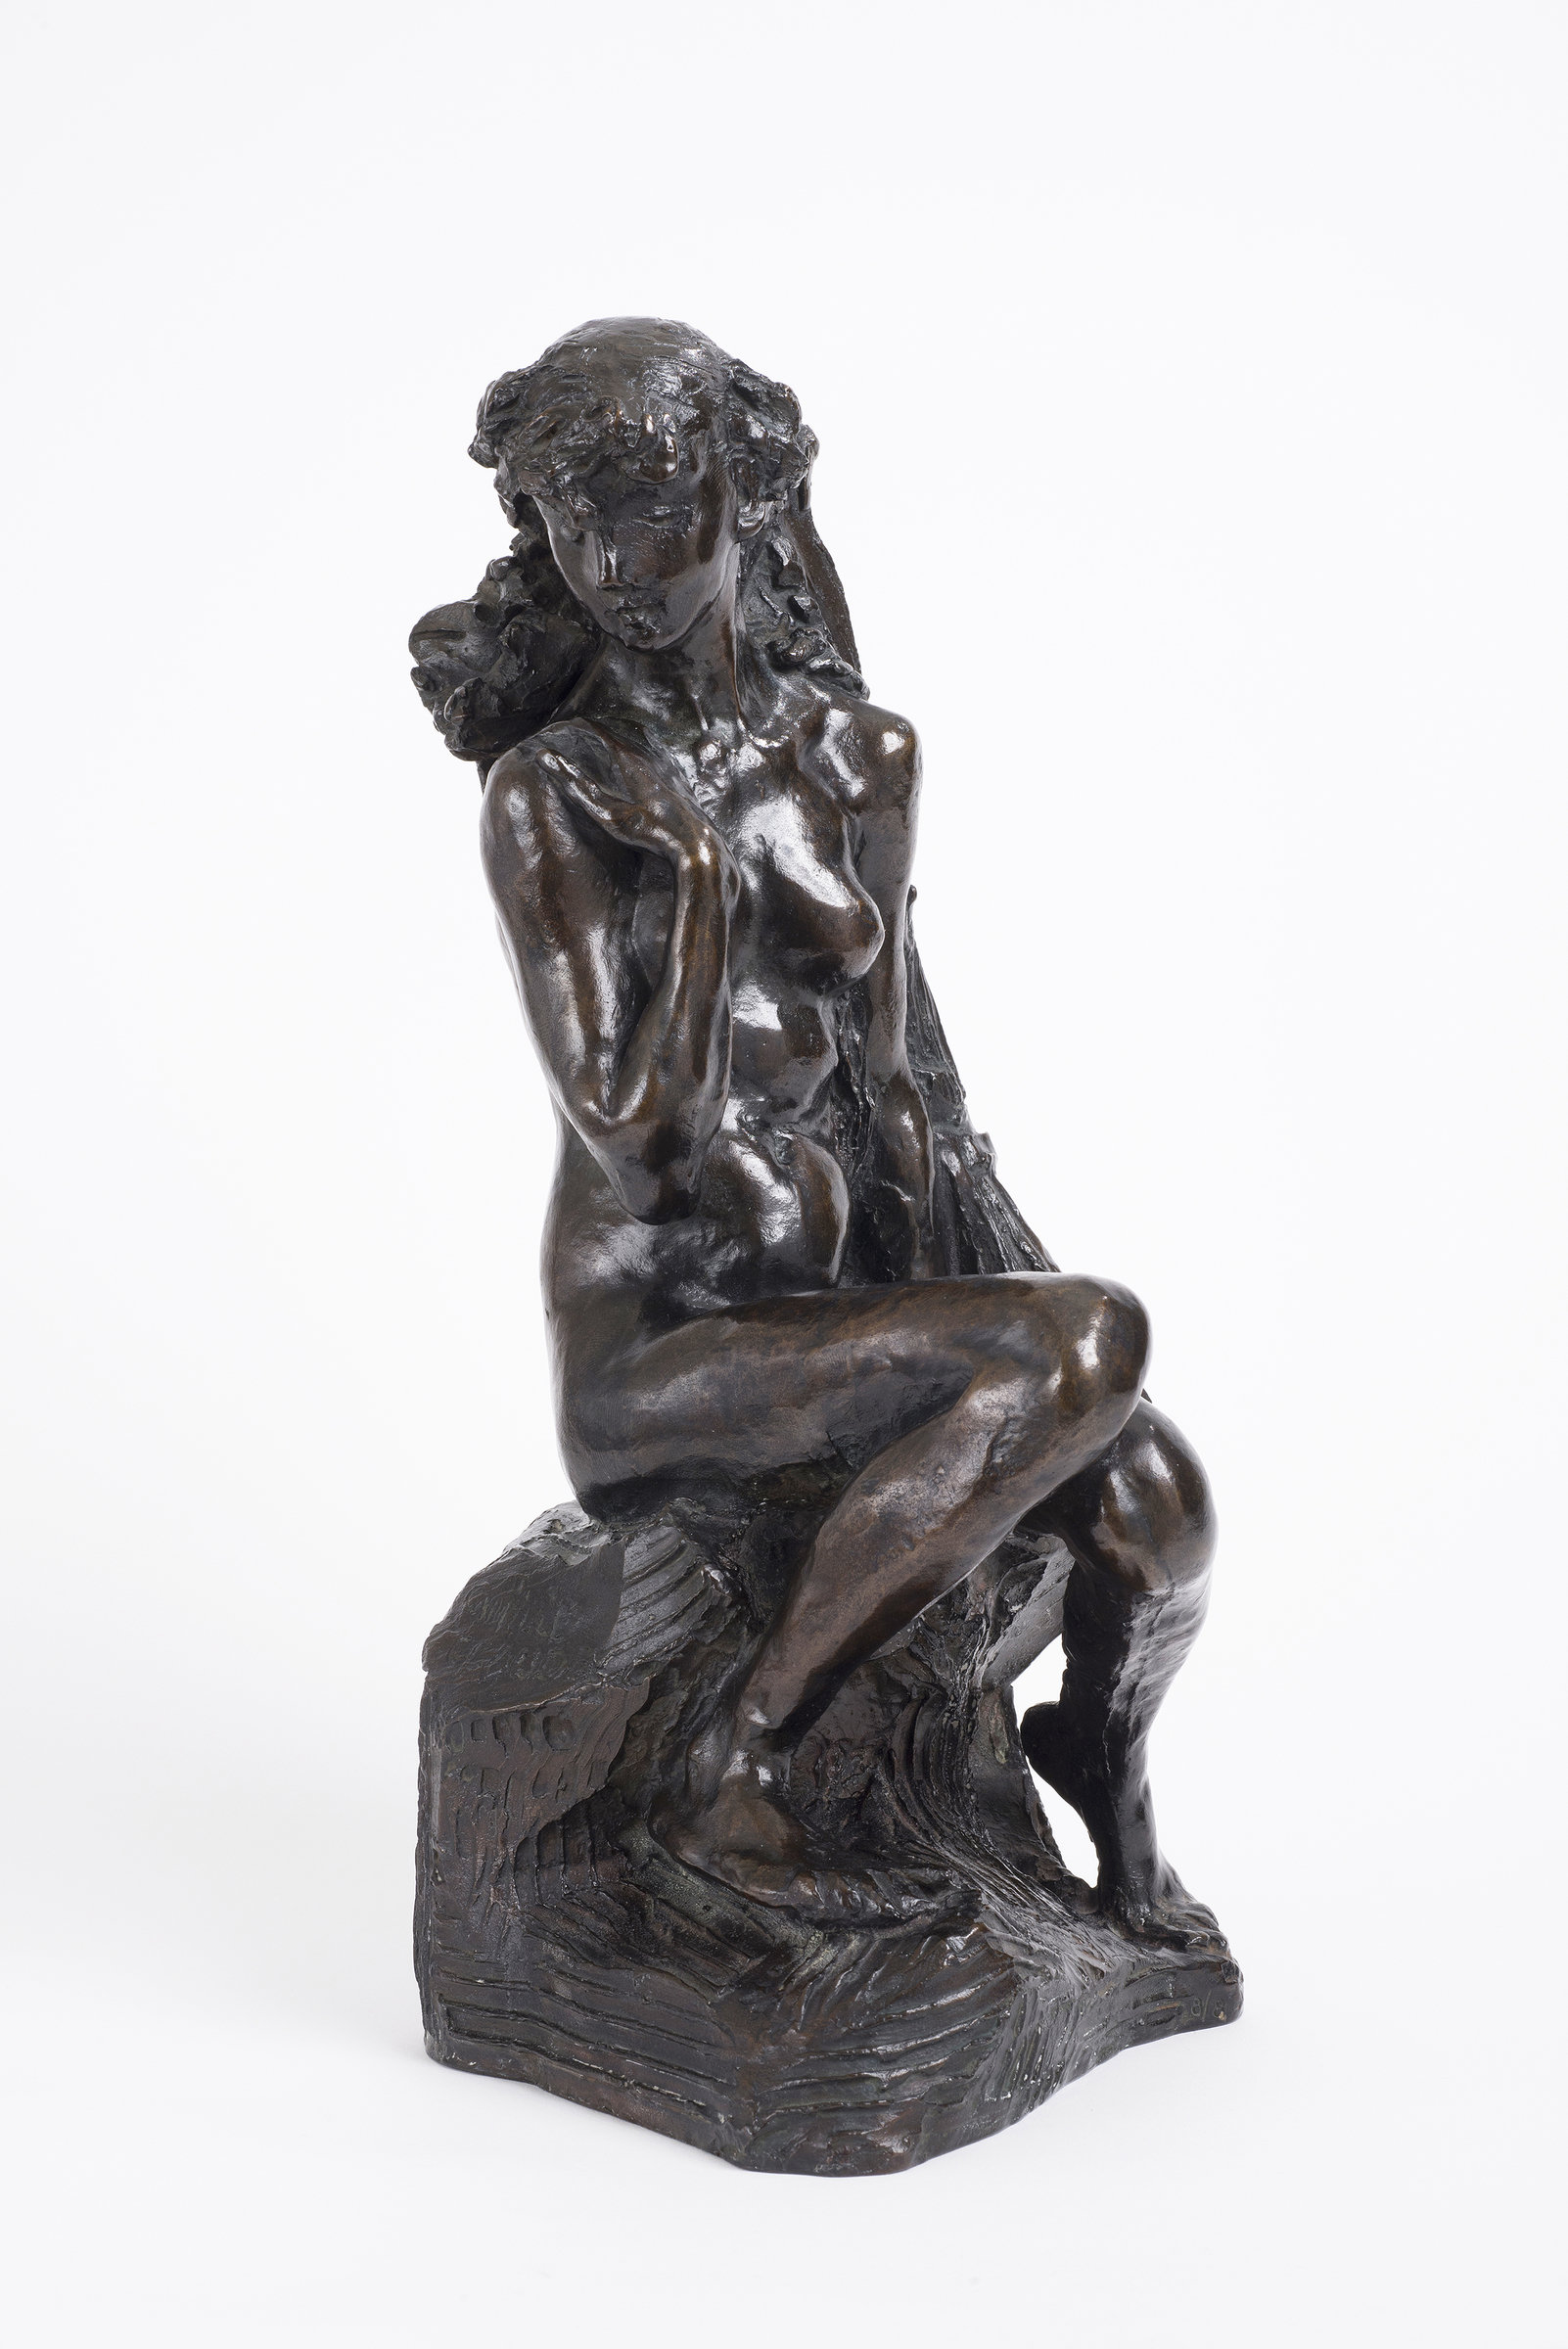 Young Girl with a Sheaf by Camille Claudel - ca. 1890 - 14 1/8 x 7 x 7 1/2 in National Museum of Women in the Arts